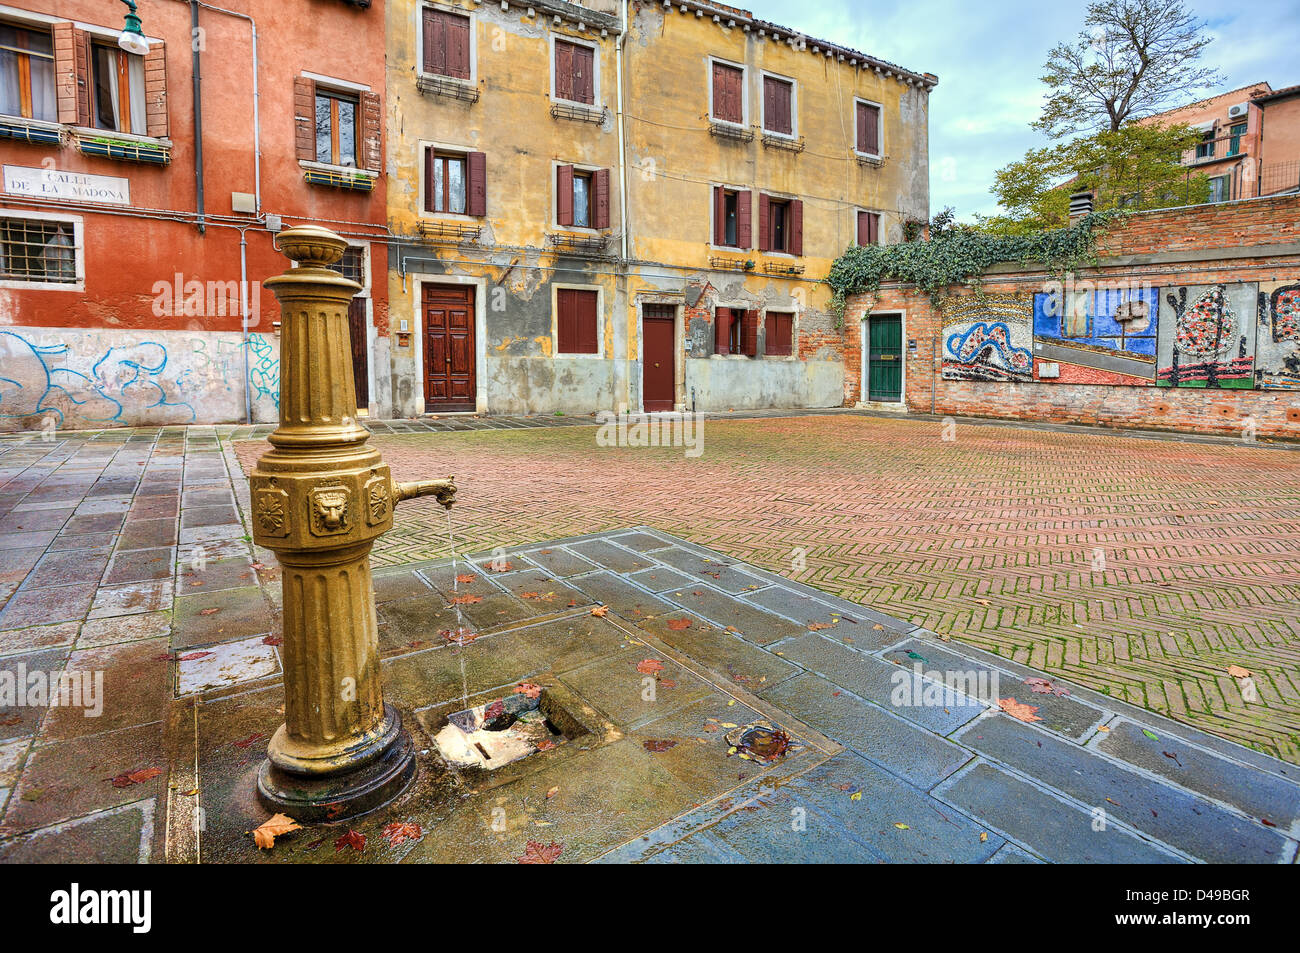 Water pump on courtyard among old traditional venetian colorful houses in Venice, Italy. Stock Photo